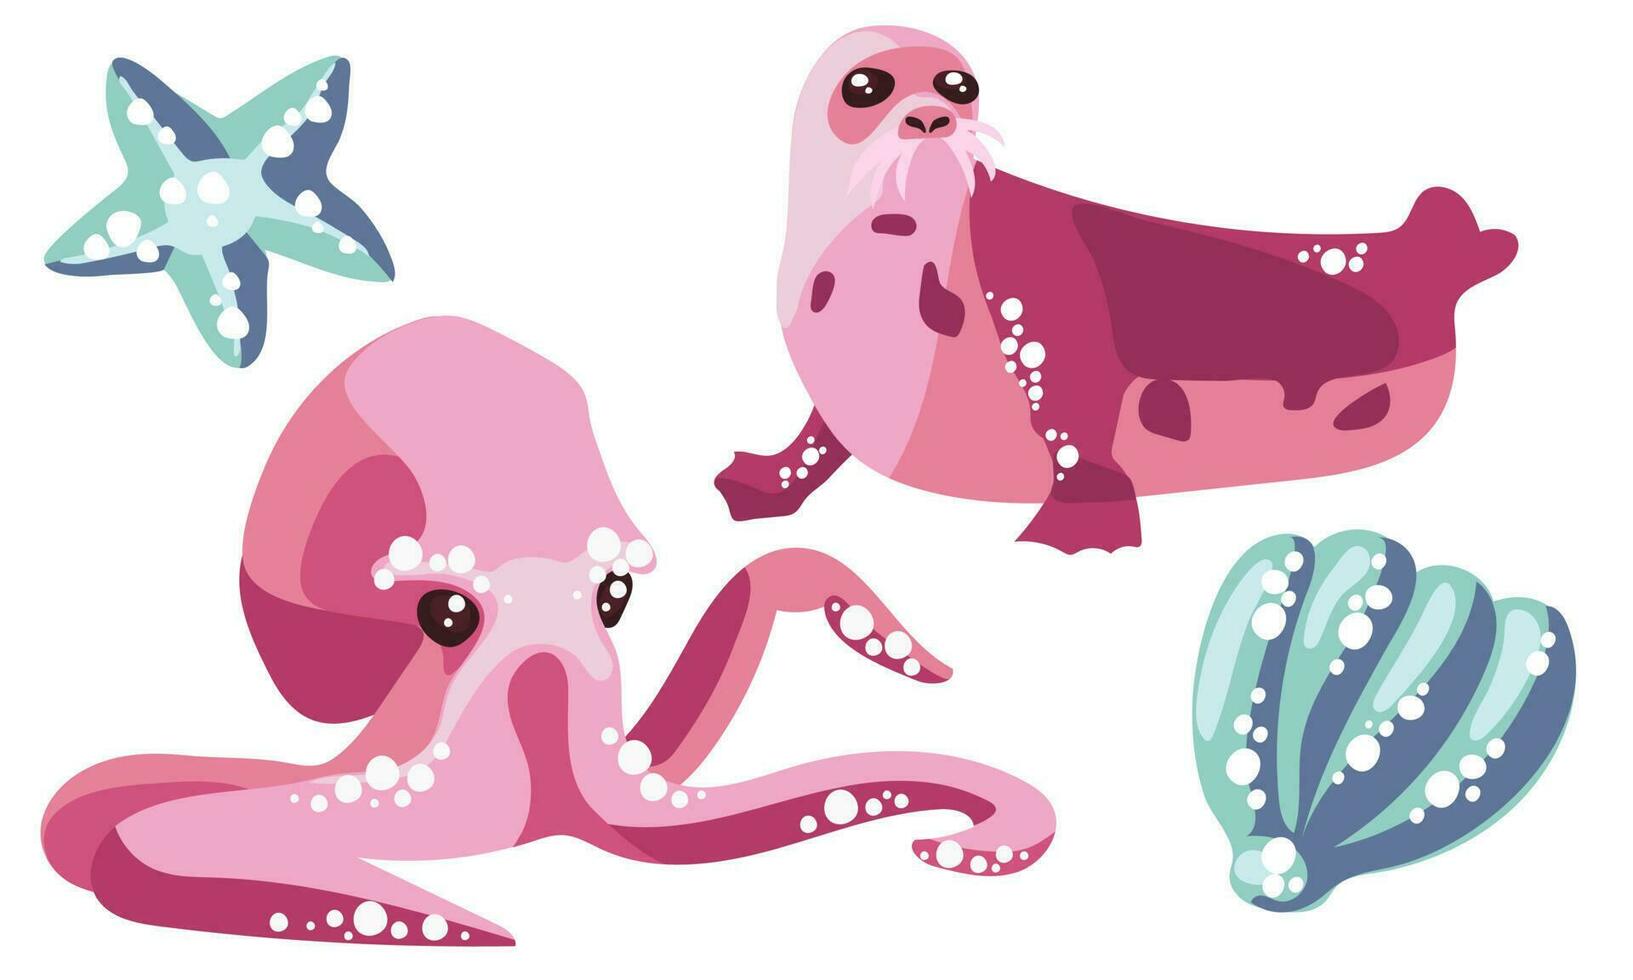 Mini set with pink octopus, seal and blue seashell, starfish. Cute animals swim in isolation on a white background. Collection of stickers on the theme of marine animals with bubbles. Abstract forms vector